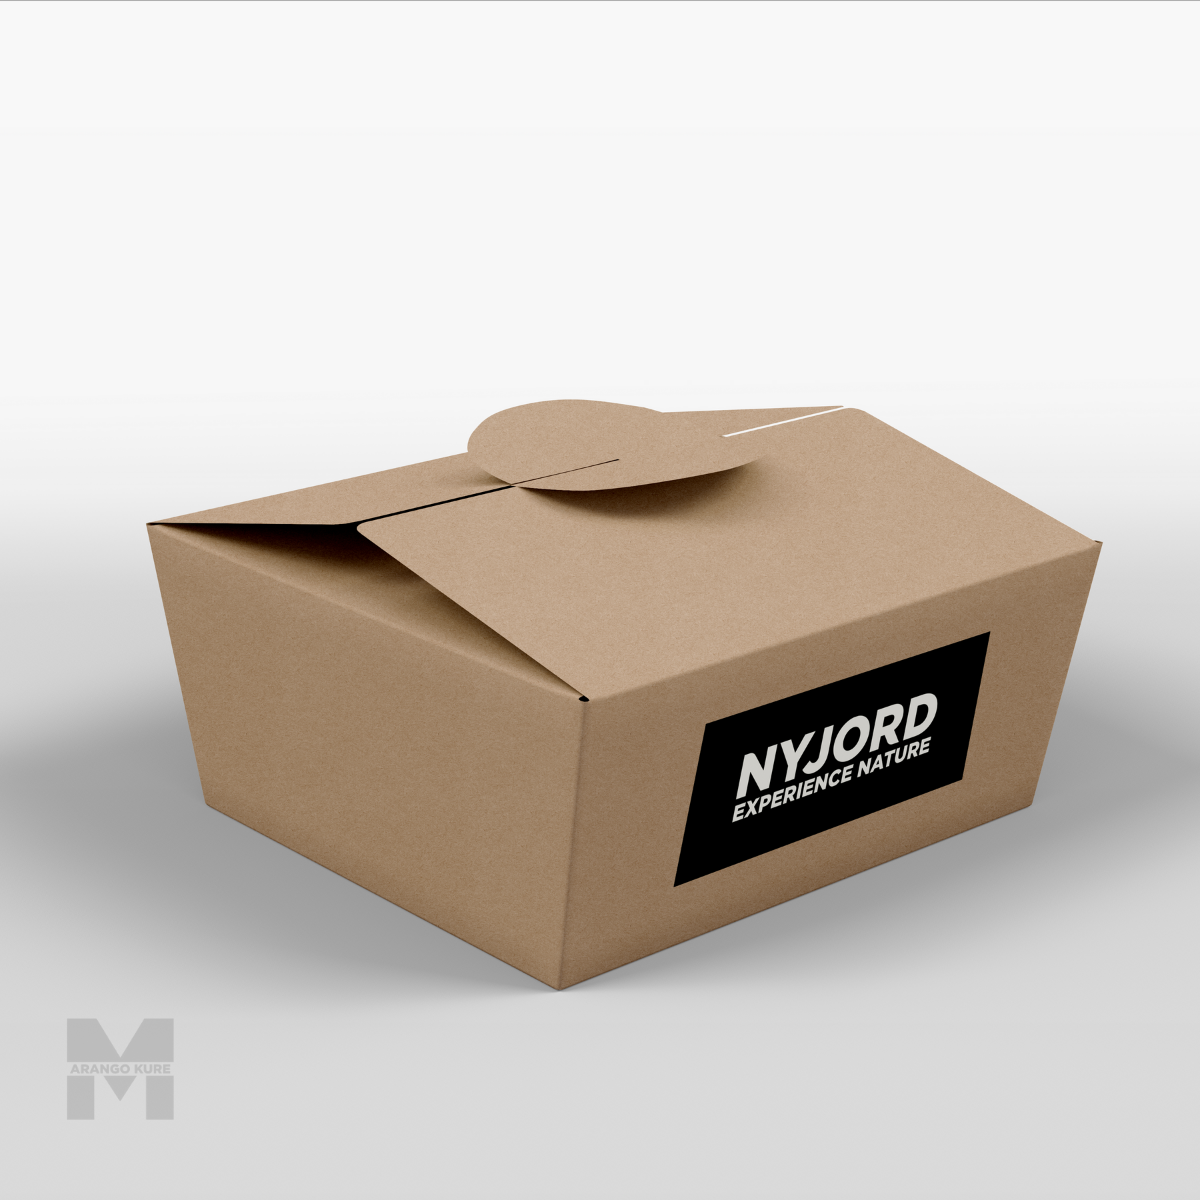 cardboard carry box with nyjord branding on a label